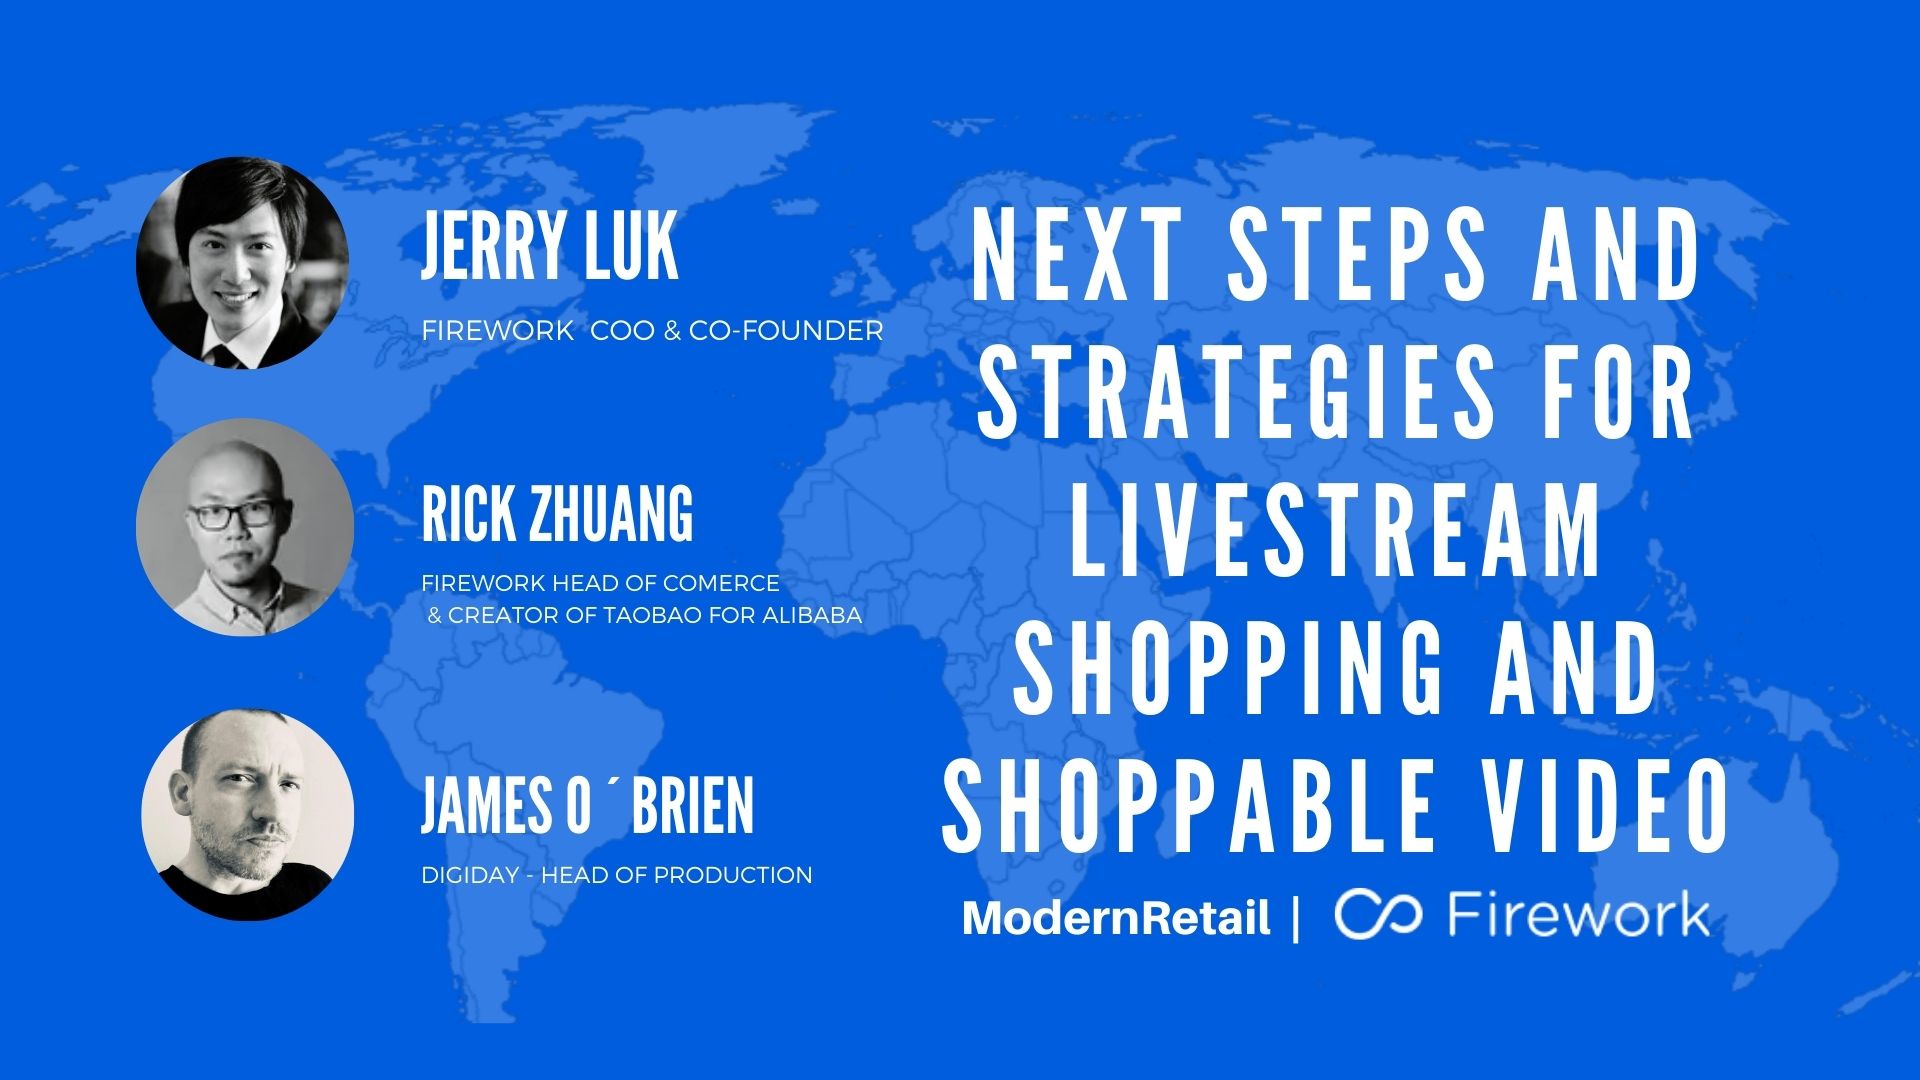 Next-Steps-and-Strategies-for-Livestream-Shopping-and-Shoppable-Video-1